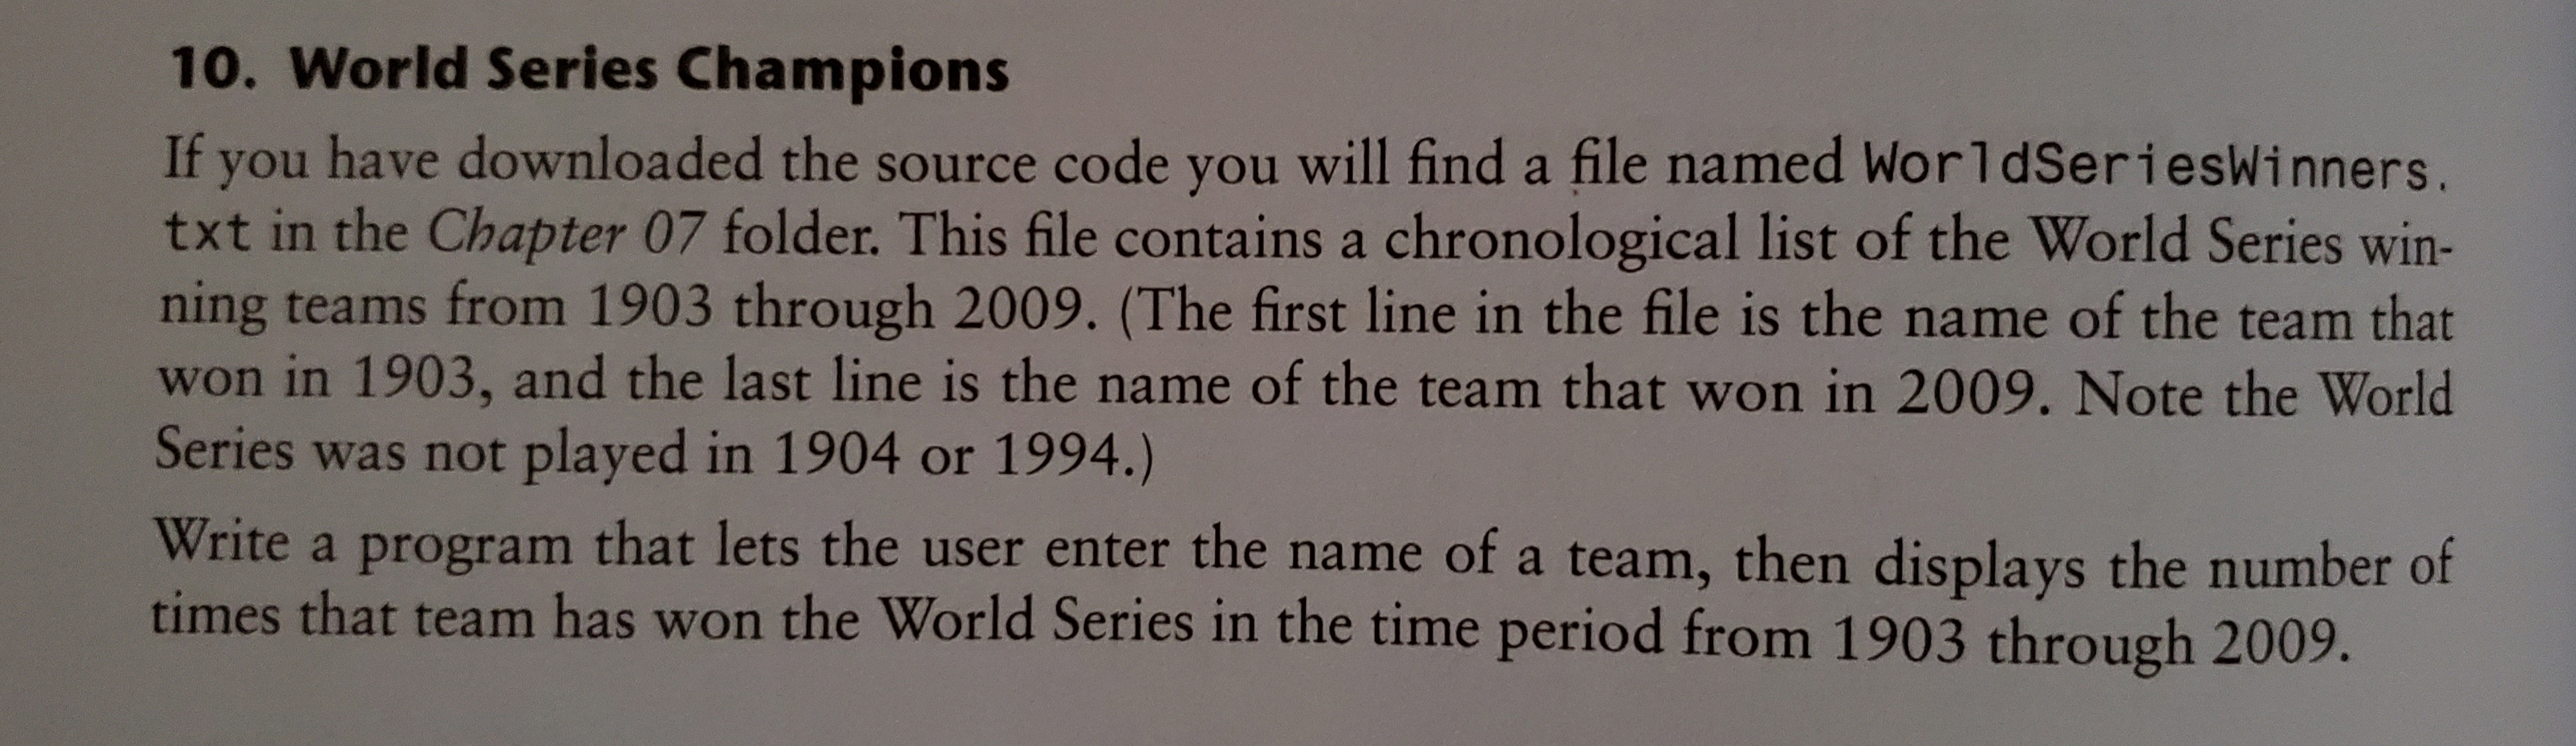 10. World Series Champions
If you have downloaded the source code you will find a file named WorldSeriesWinners.
txt in the Chapter 07 folder. This file contains a chronological list of the World Series win-
ning teams from 1903 through 2009. (The first line in the file is the name of the team that
won in 1903, and the last line is the name of the team that won in 2009. Note the World
Series was not played in 1904 or 1994.)
Write a program that lets the user enter the name of a team, then displays the number of
times that team has won the World Series in the time period from 1903 through 2009.
